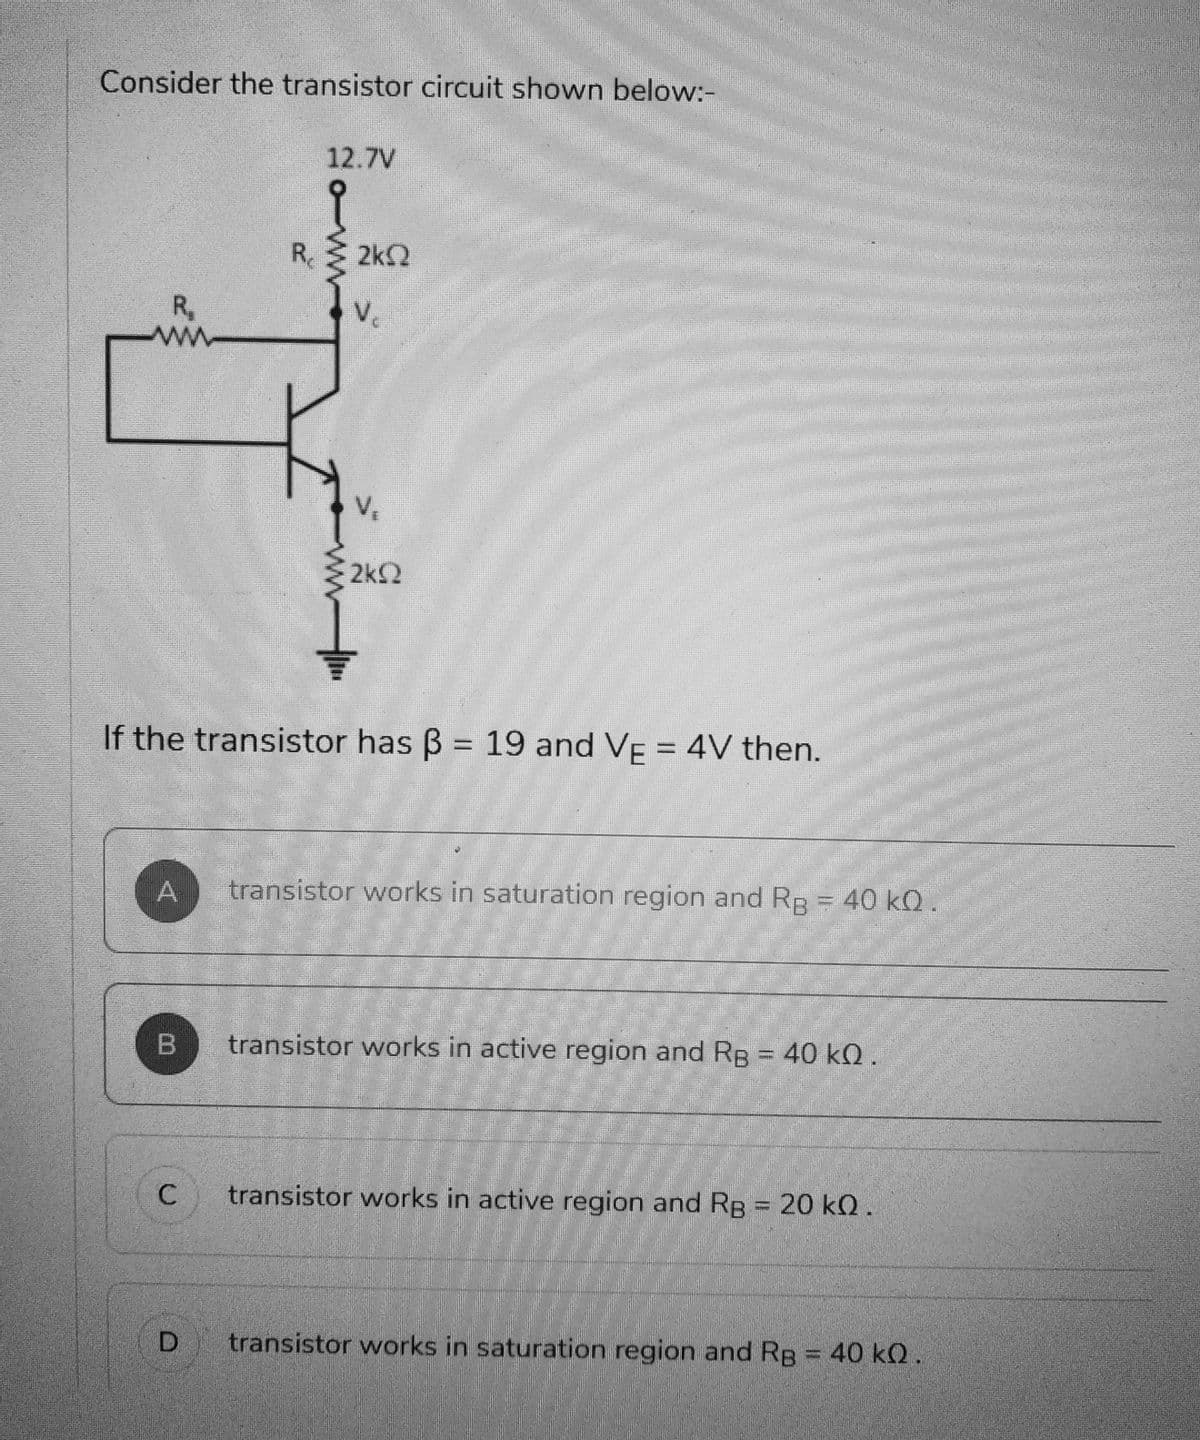 Consider the transistor circuit shown below:-
R₂
www.
A
B
If the transistor has ß = 19 and VÊ = 4V then.
C
12.7V
9
R. Σ ΣΚΩ
D
V₁
2kQ
1
transistor works in saturation region and RB = 40 KQ.
transistor works in active region and RB = 40 kQ.
transistor works in active region and RB = 20 kQ.
transistor works in saturation region and RB = 40 kQ.